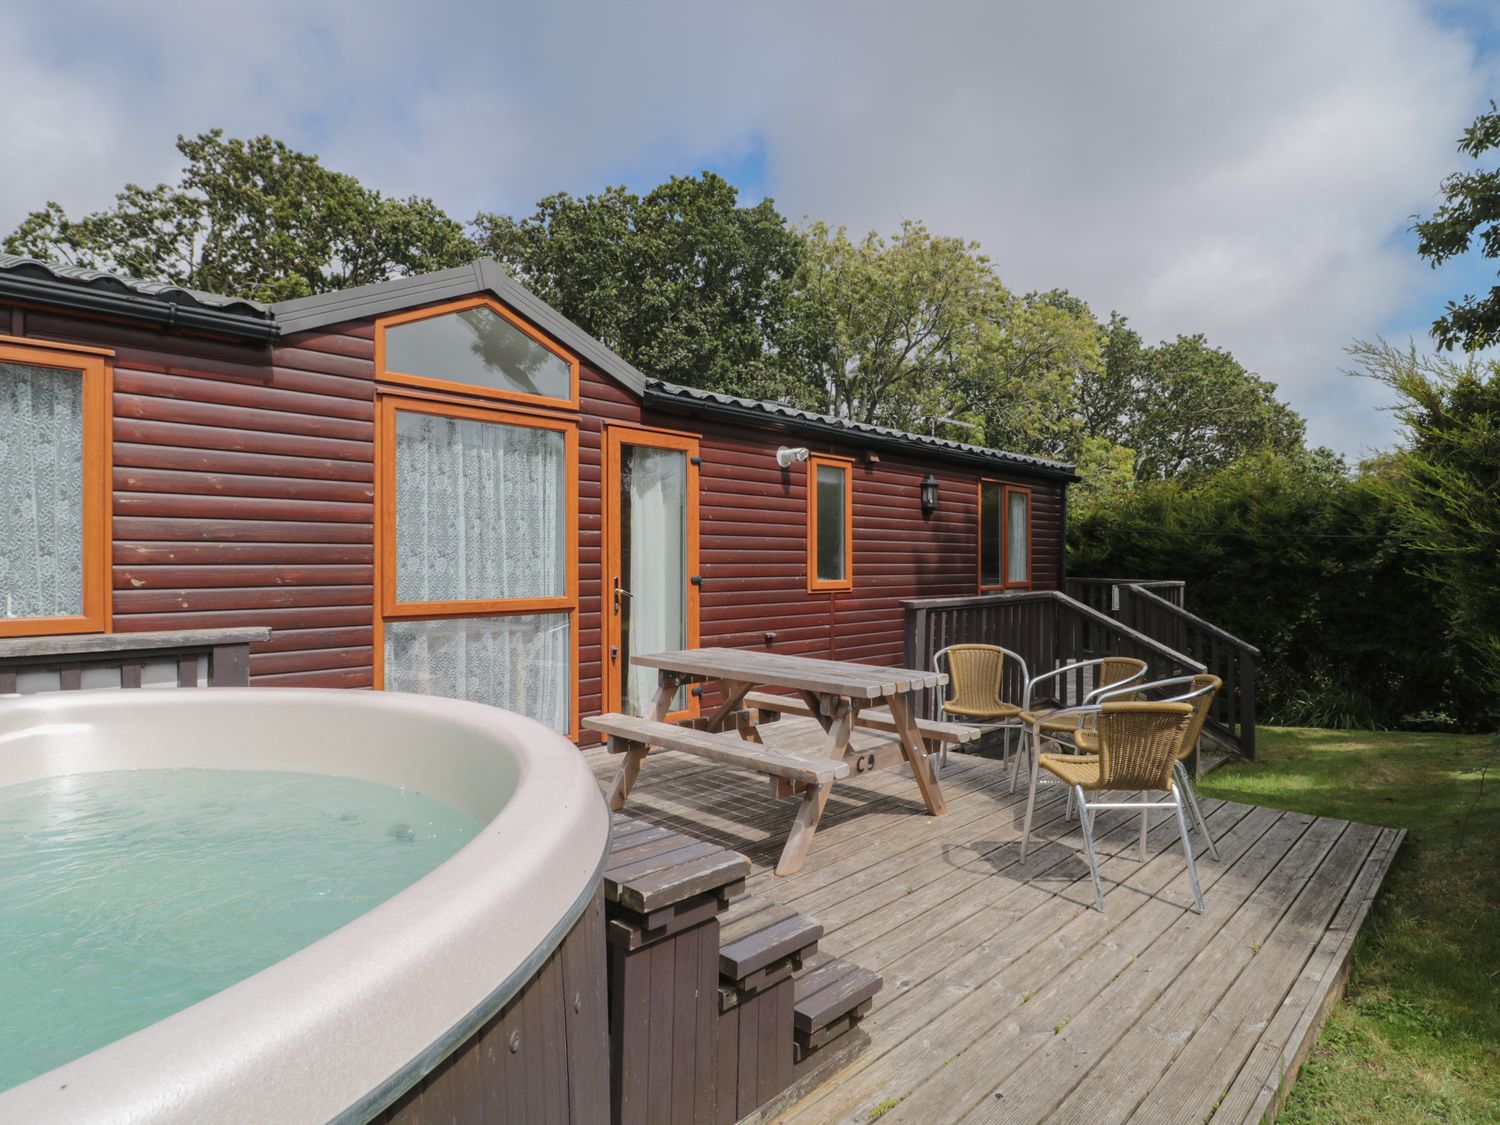 Birch, Swanage, Dorset. 2-bedrooms, open-plan, decking with hot tub, electric fire and rural setting